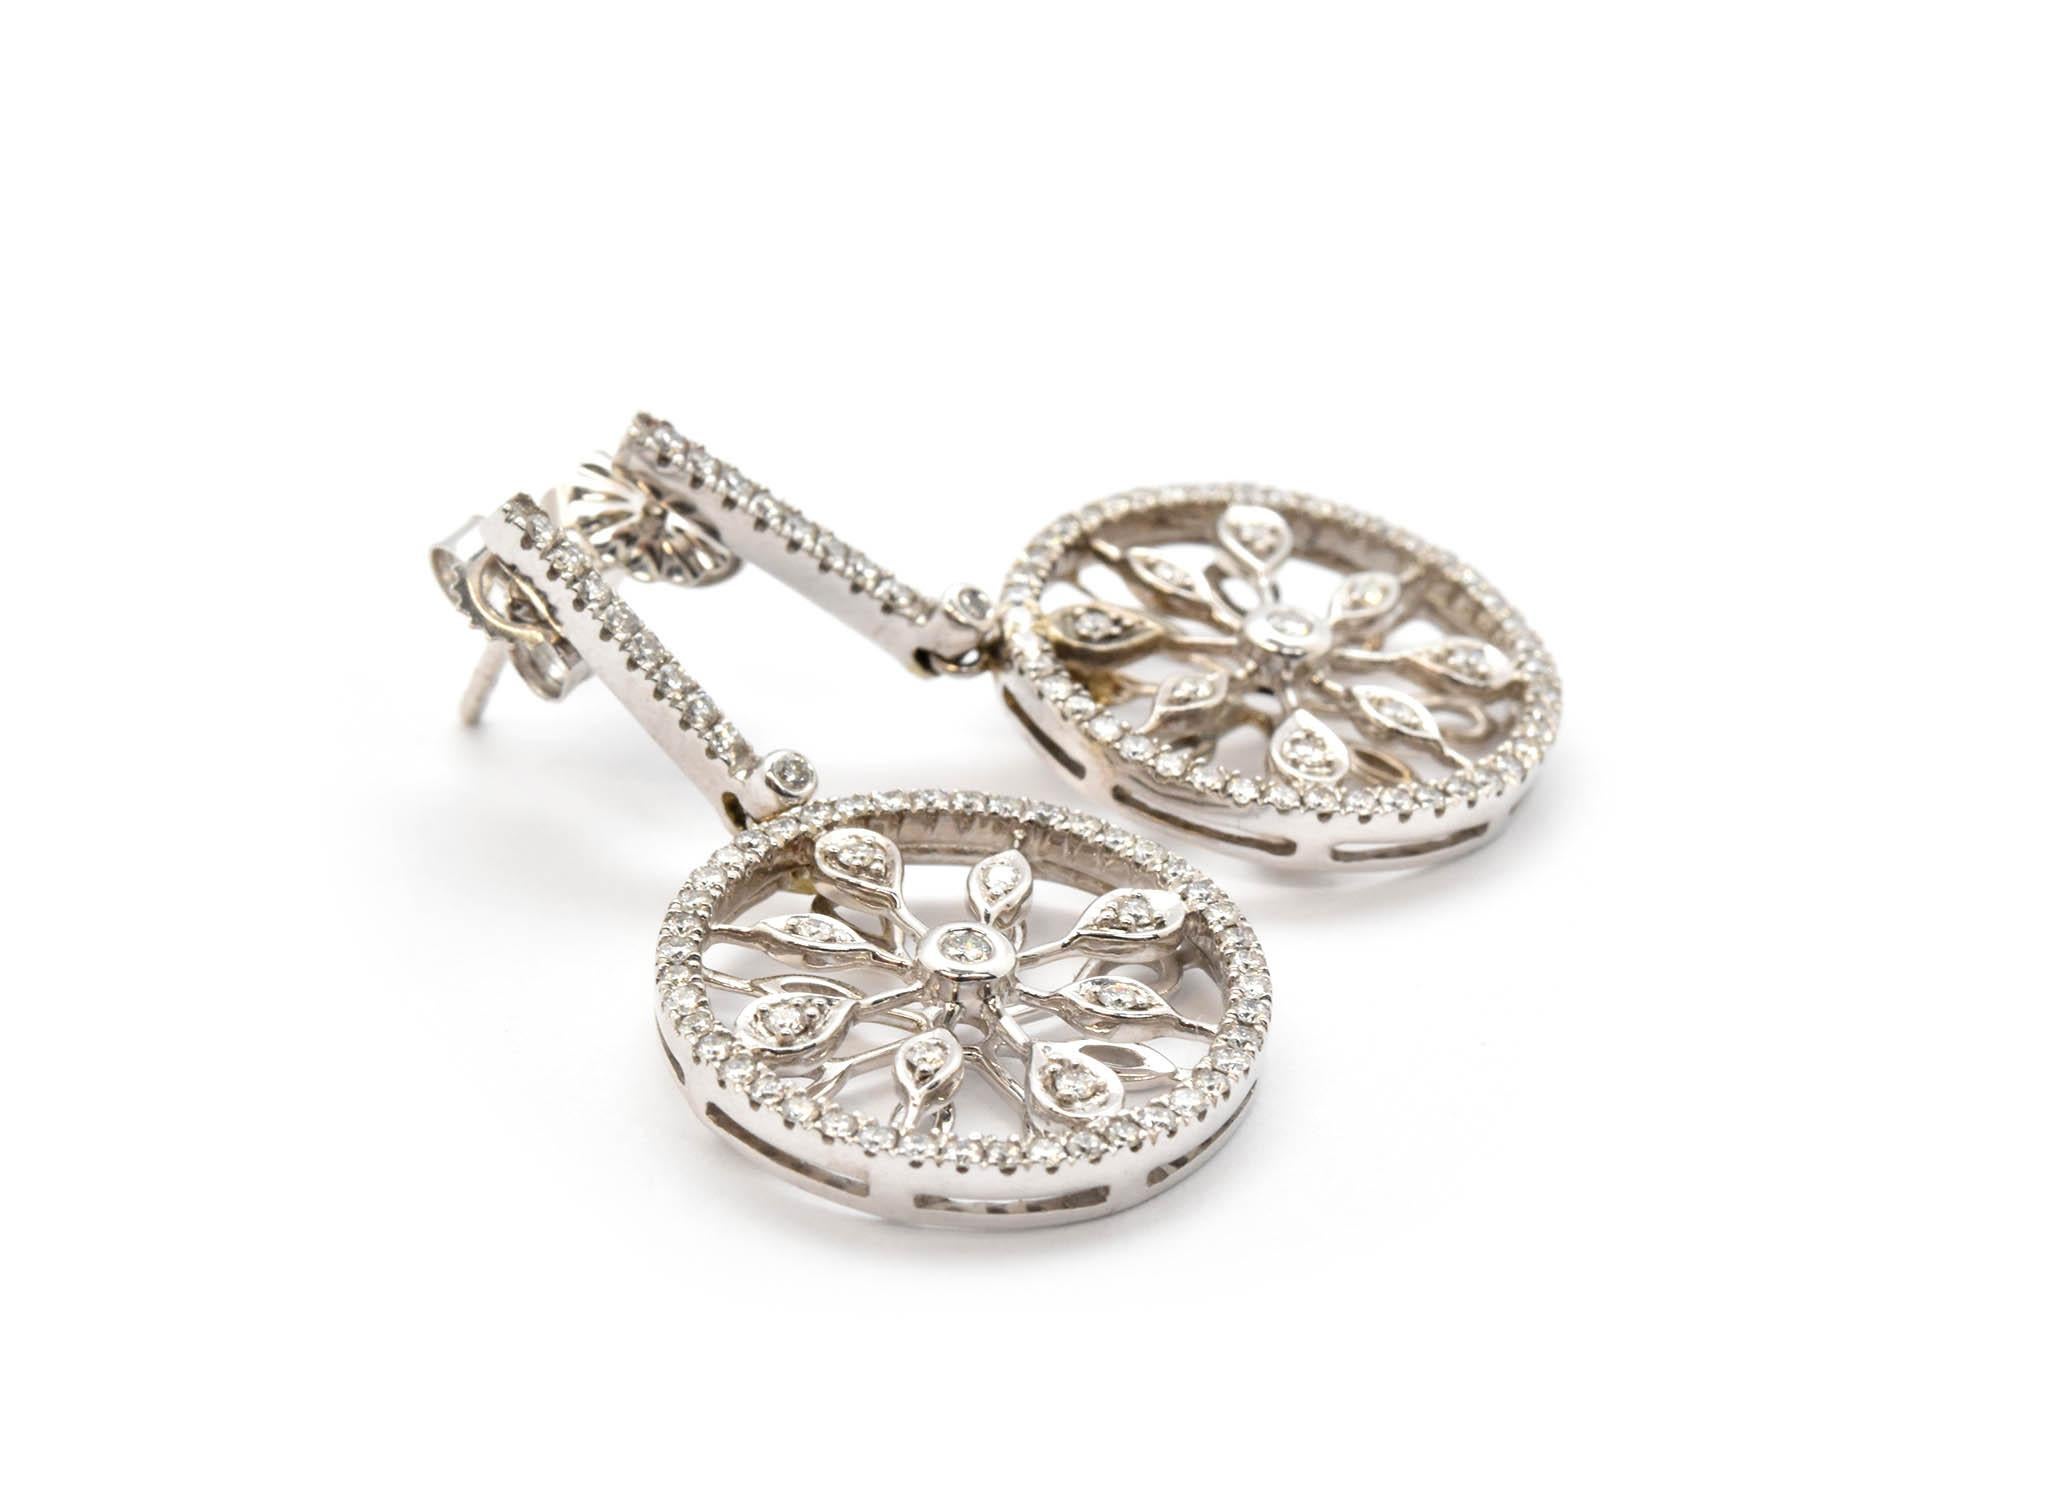 These fun earrings are made in solid 14k white gold, and each earring features a diamond circle hanging from a straight diamond bar. The diamonds have a total weight of 0.64ct, and they are graded G-H in color and SI in clarity. The earrings measure